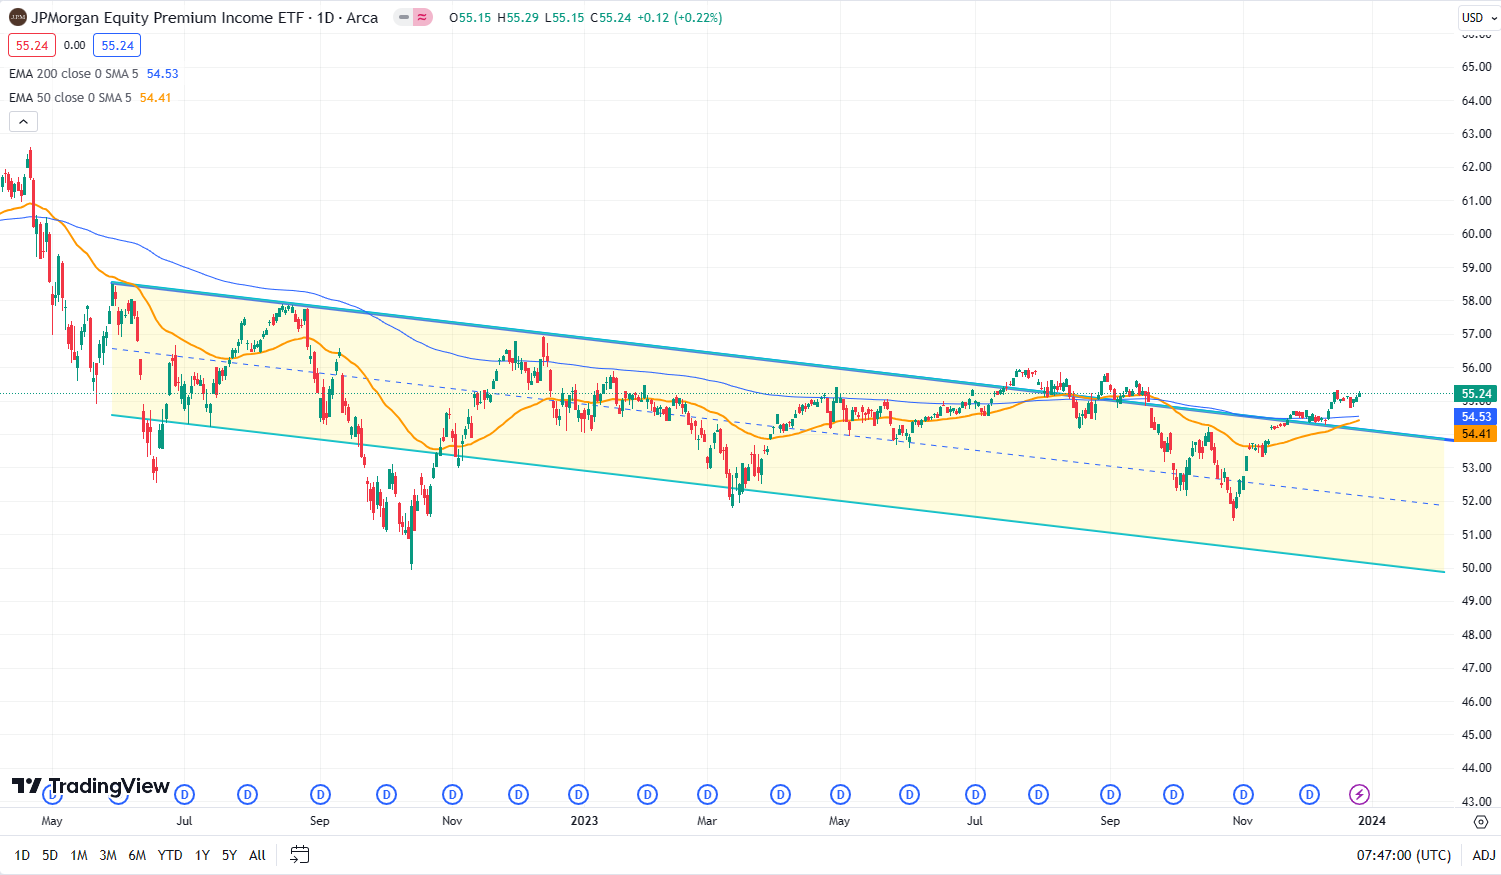 Breakout from the downtrend channel